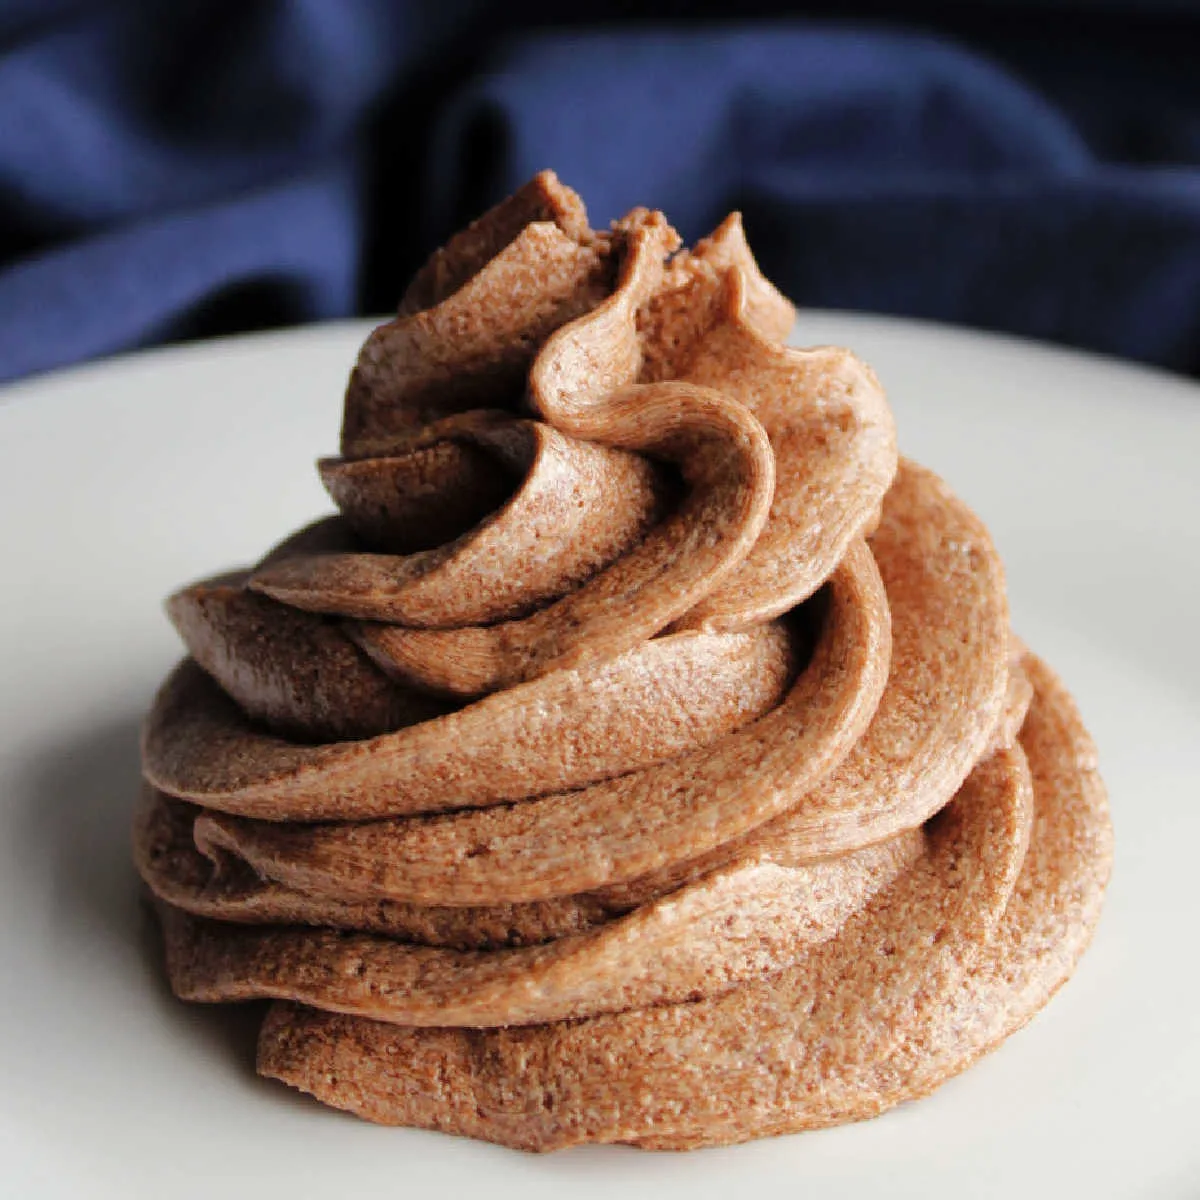 Pipe swirl of fluffy brown ermine frosting flavored with chocolate and coffee.